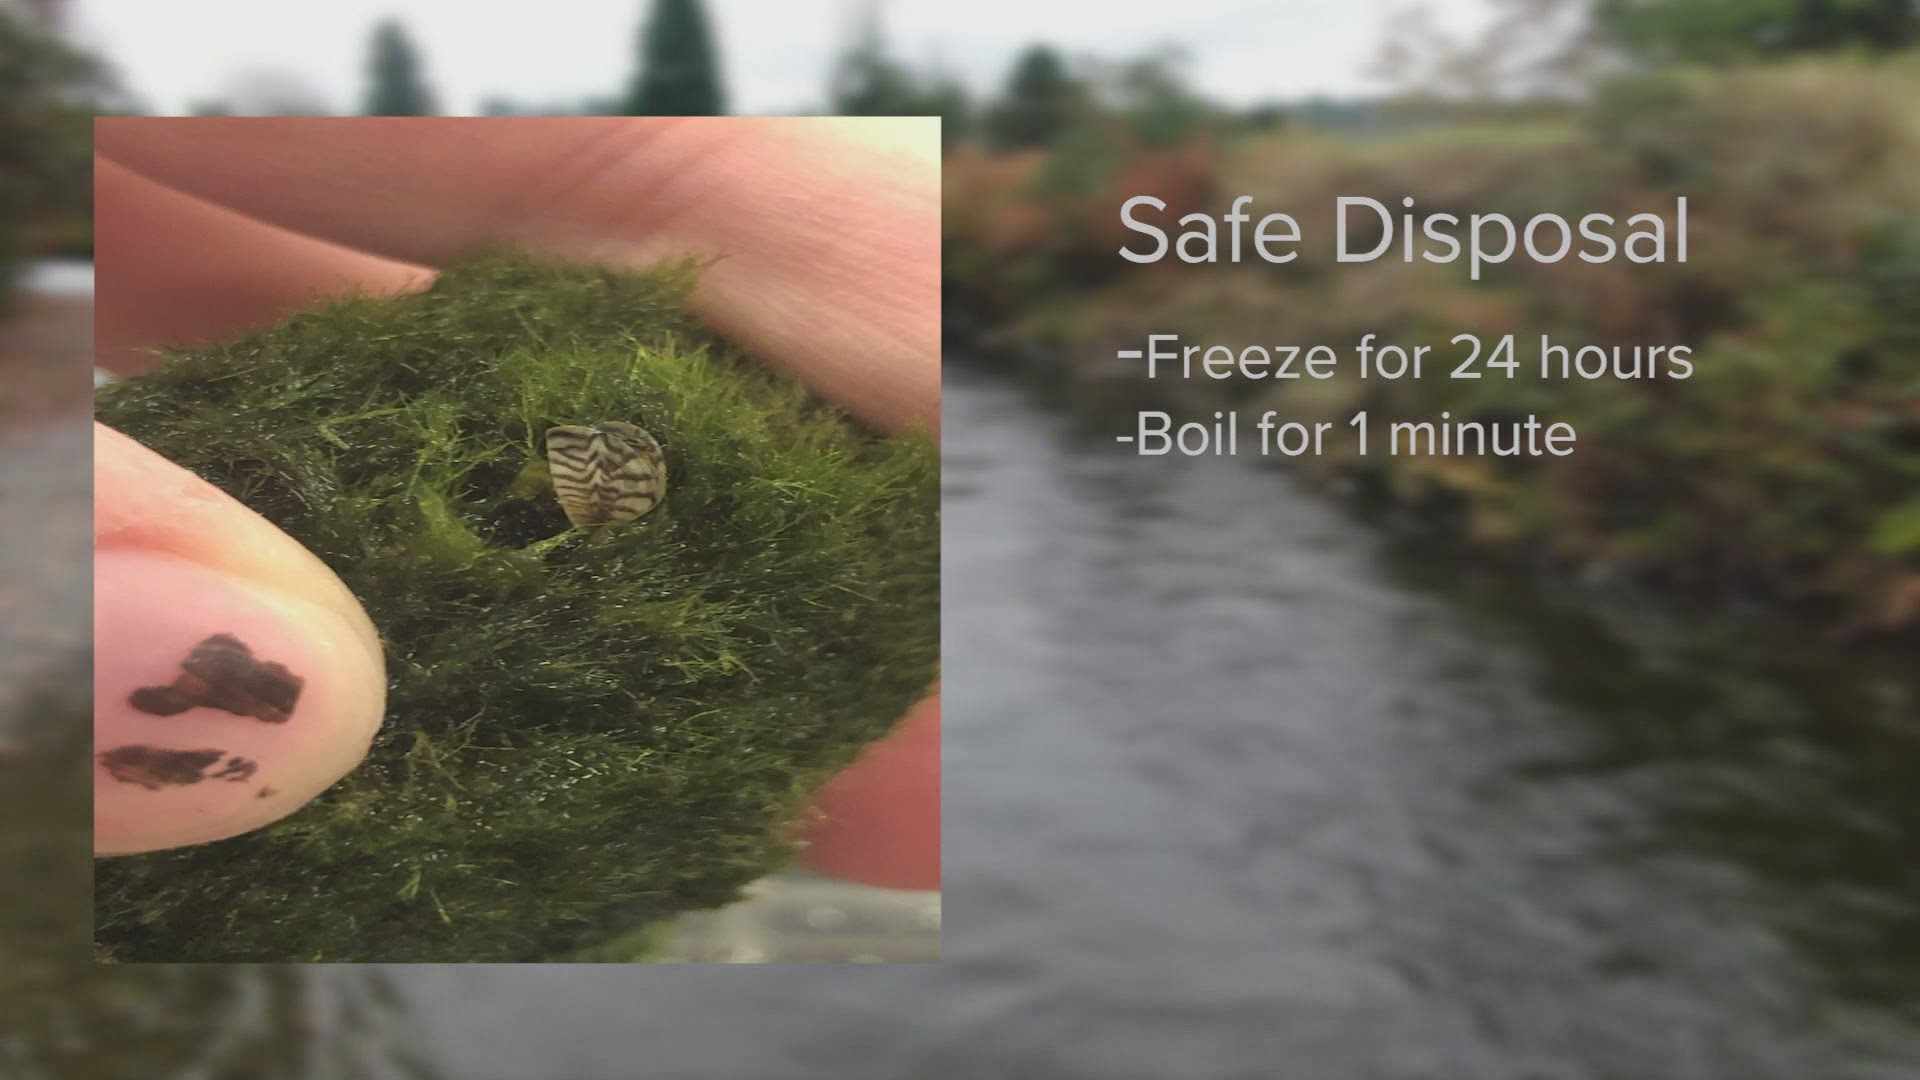 Pet stores in 21 states reported invasive zebra mussels on aquarium moss balls. Improper disposal could threaten Pacific Northwest native species and clog pipes.